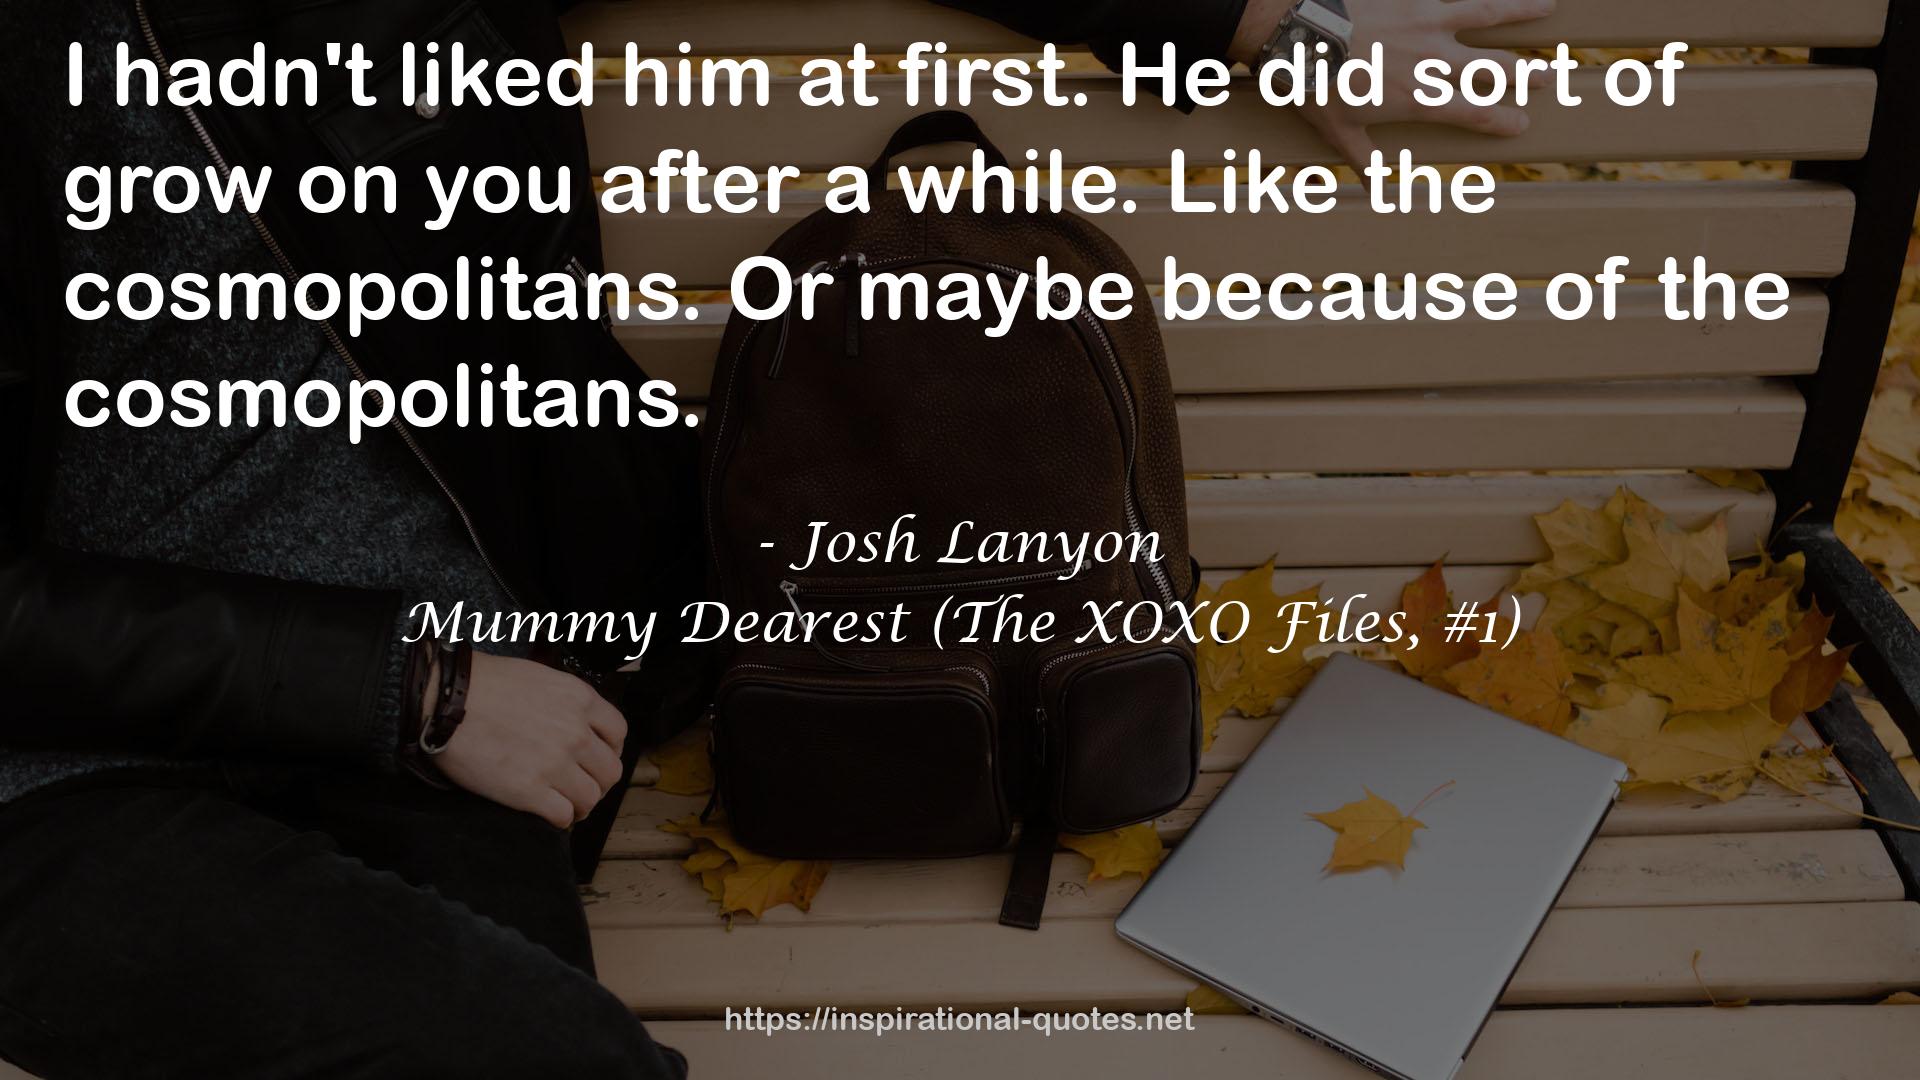 Mummy Dearest (The XOXO Files, #1) QUOTES